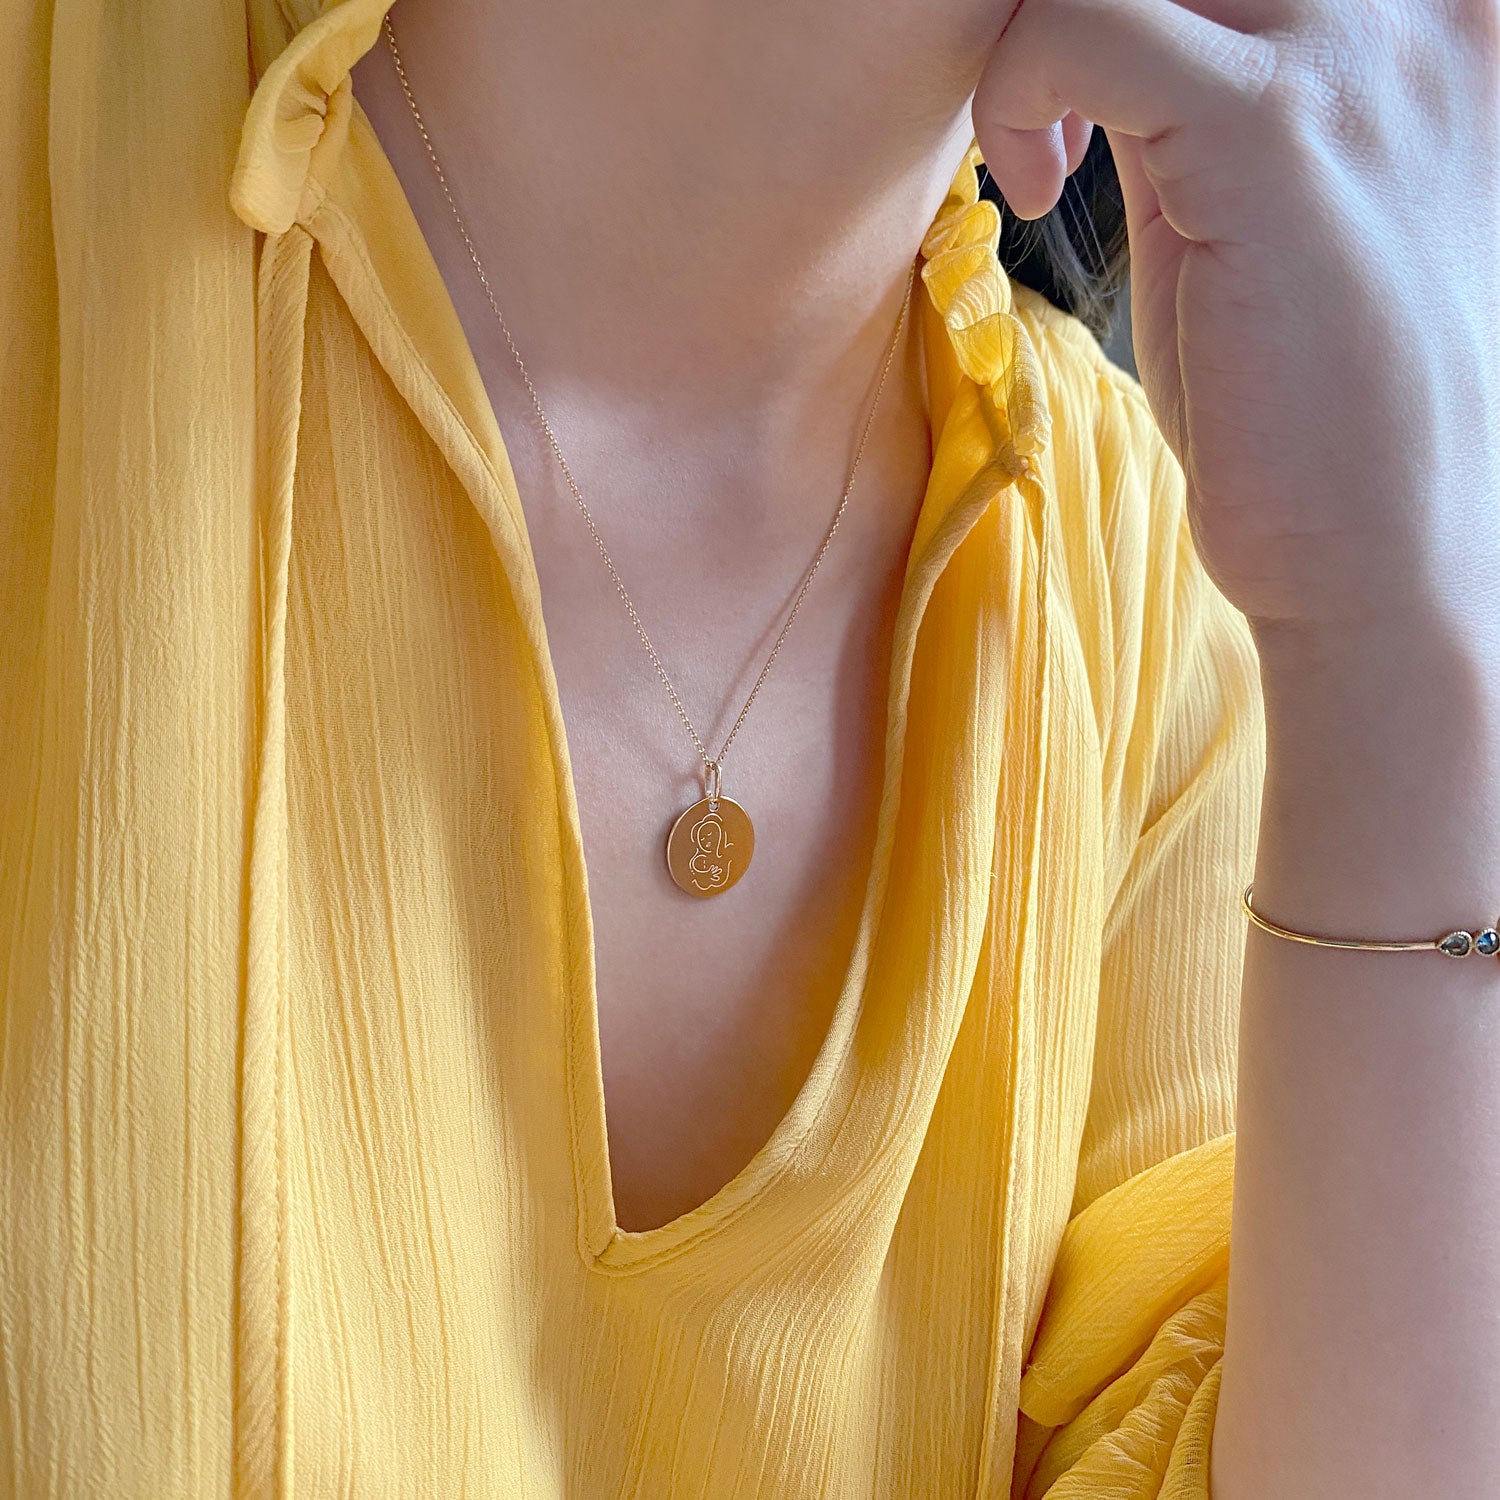 Muze 18k gold Vermeil Child Medal necklace on model with yellow dress , art inspired jewelry symbol of love, protection, tenderness and motherhood. A meaningful sentimental gift perfect for mother, newborn or godchild